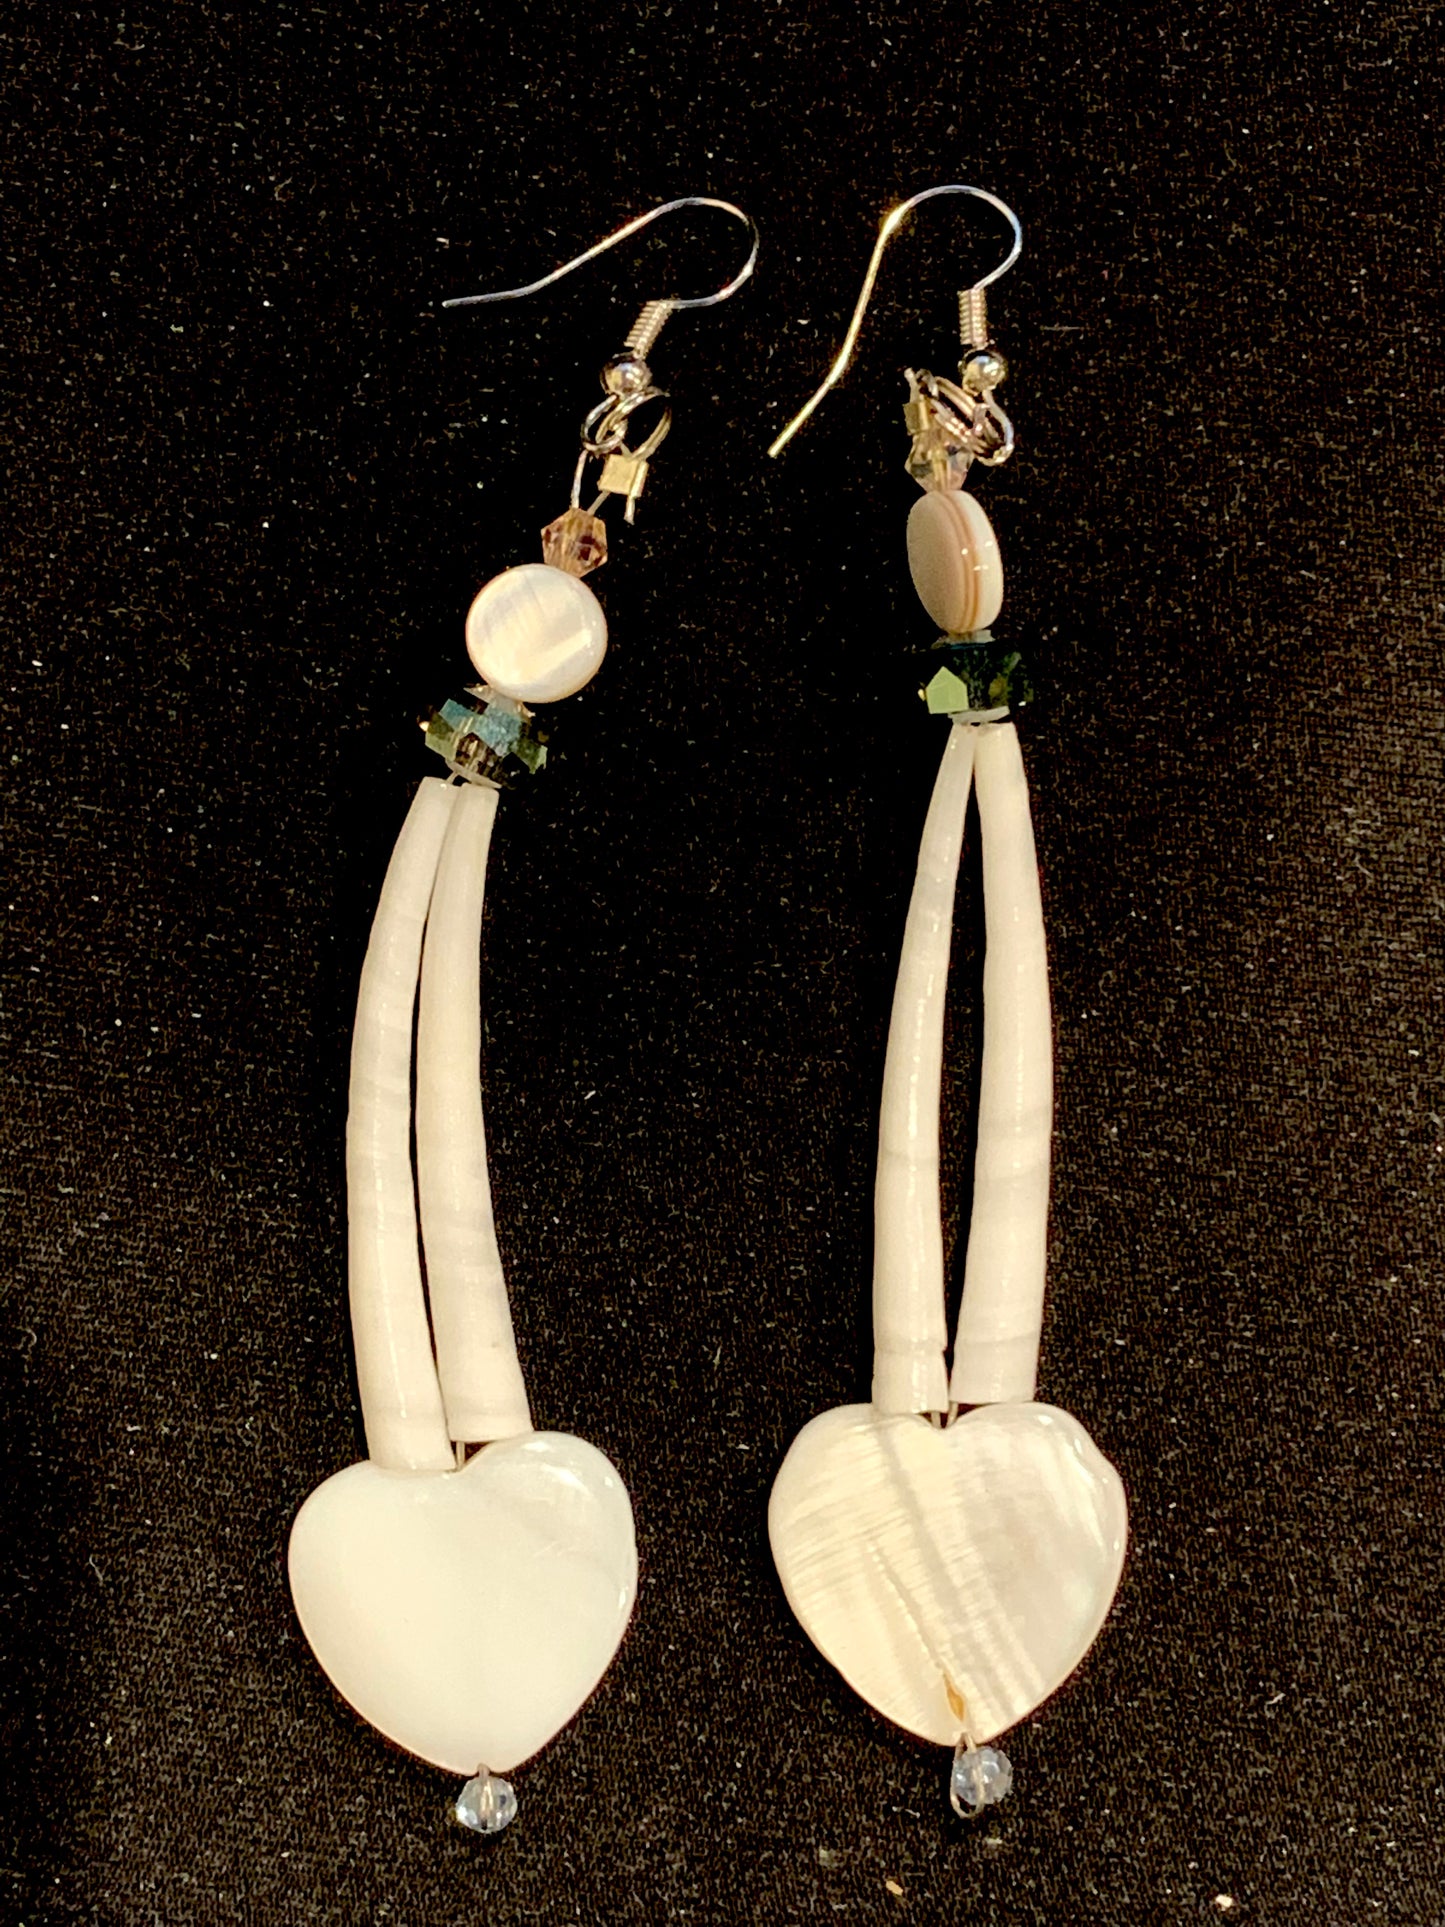 Amaris Makes Good - Two Tiered Dentalium Earrings with Hearts